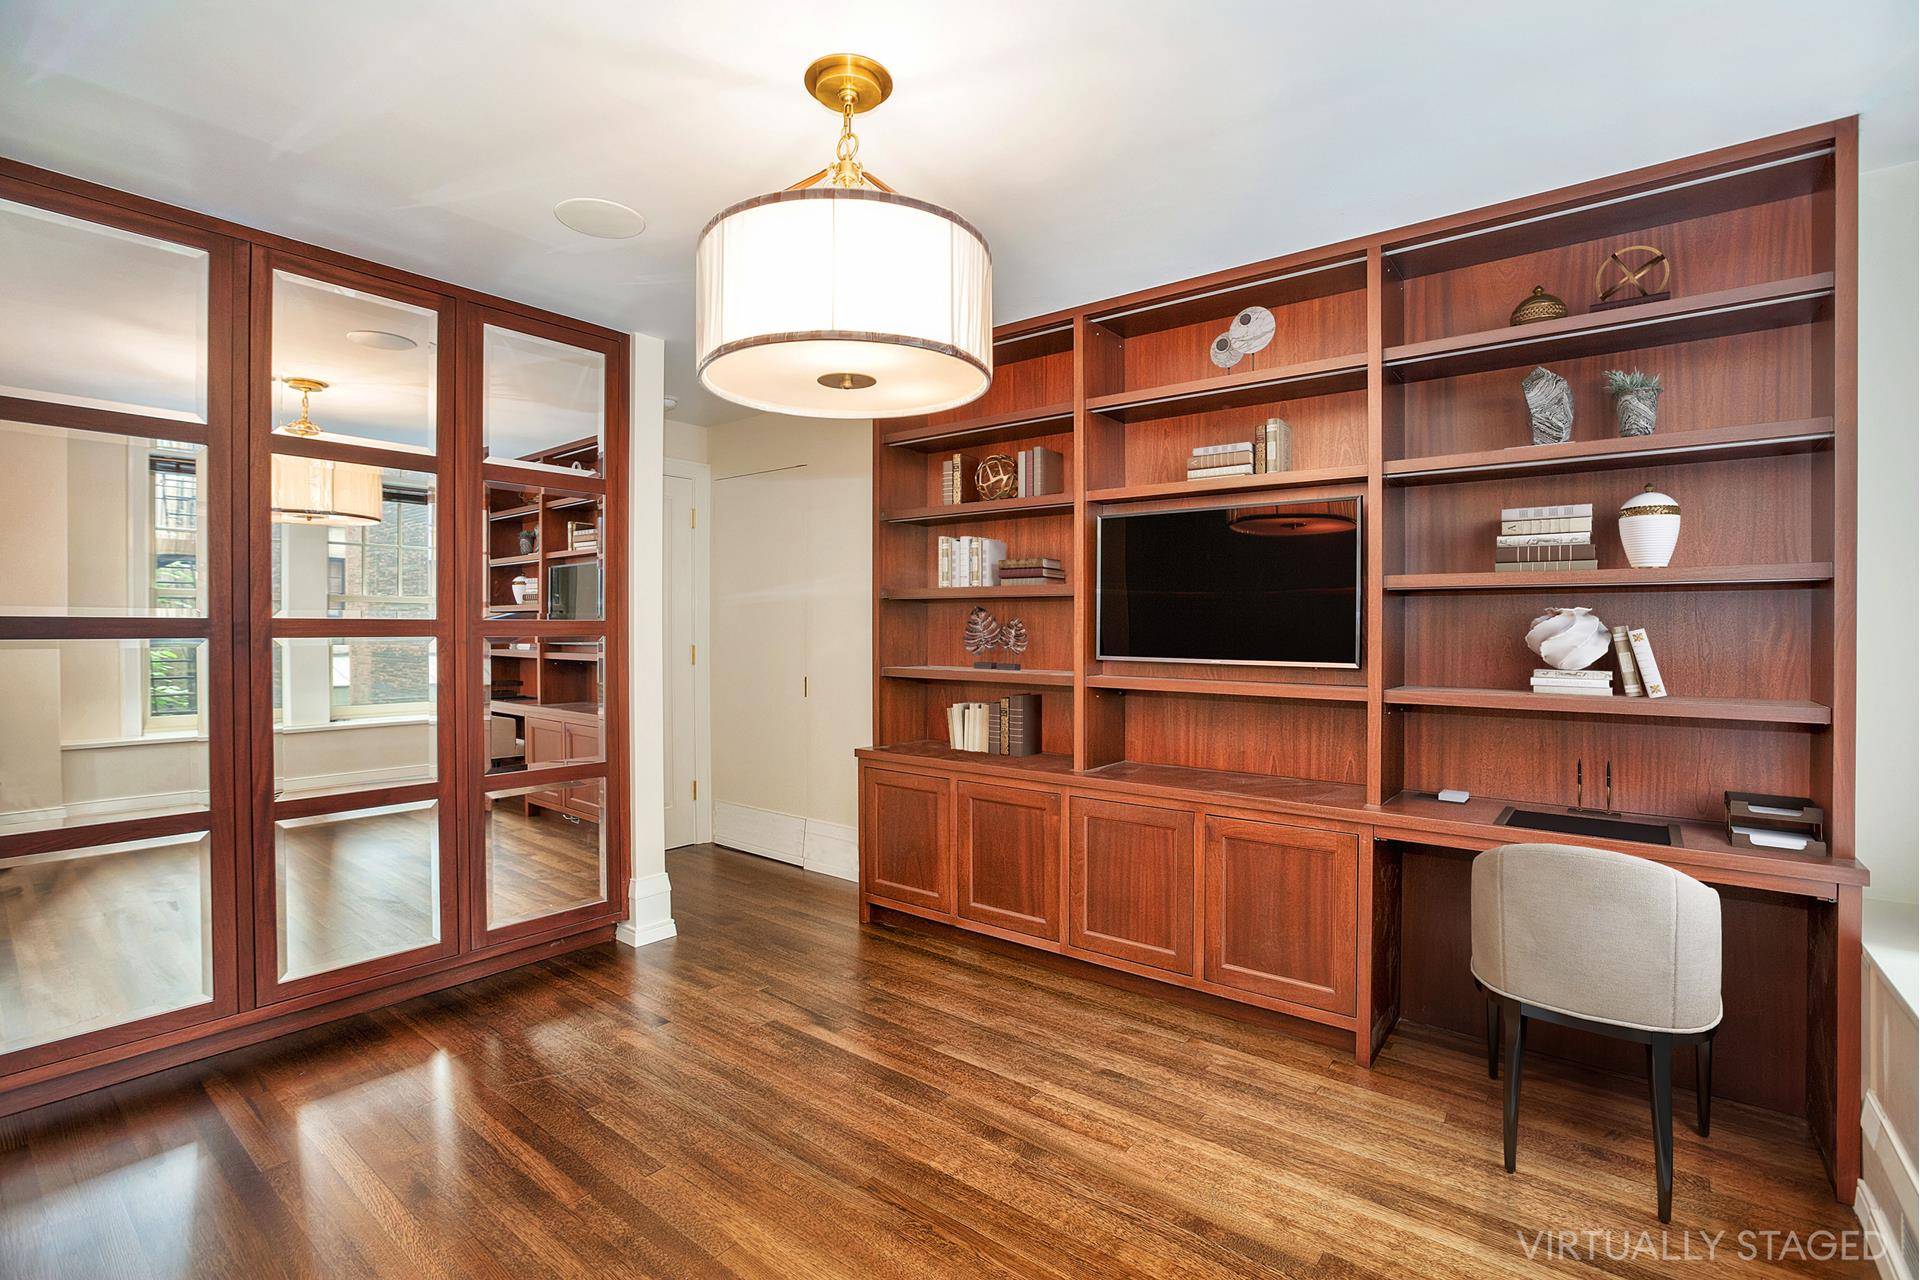 Welcome to 575 Park Avenue, 105 A seamless combination of three apartments of the Second Floor in a White Glove Park Ave Co op with luxury at the forefront.